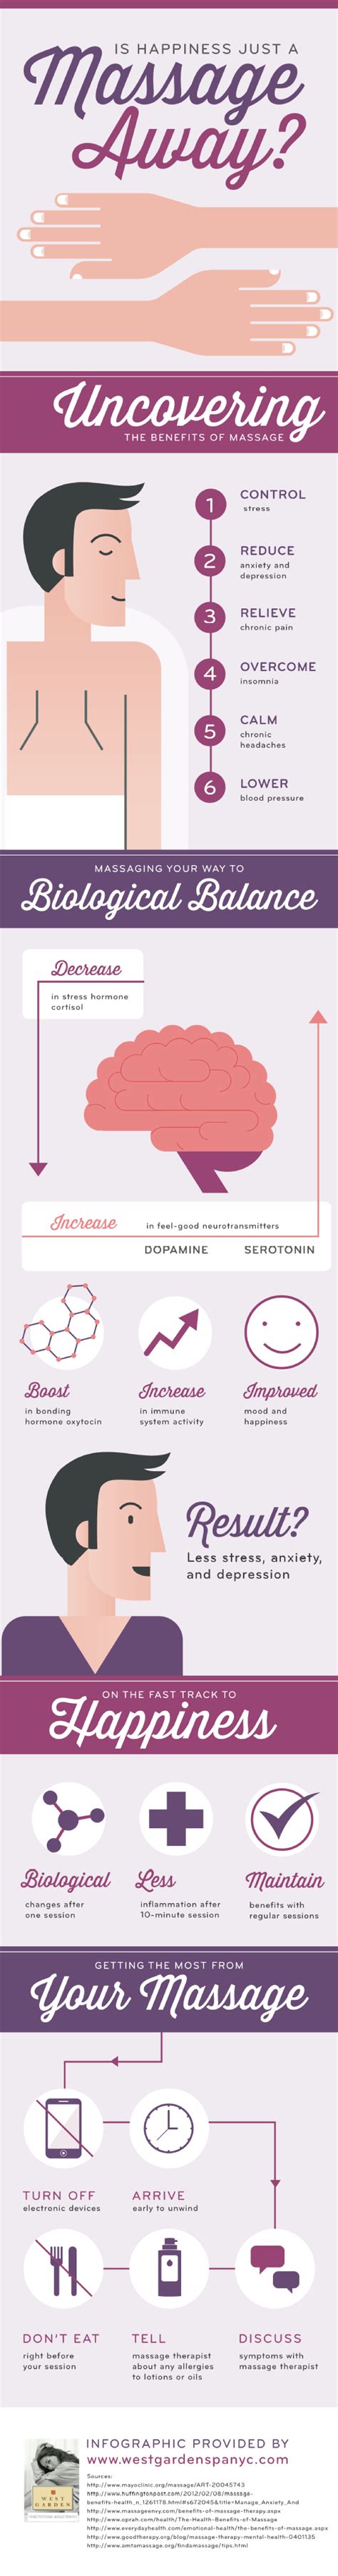 Is Happiness Just A Massage Away [infographic] ~ Visualistan